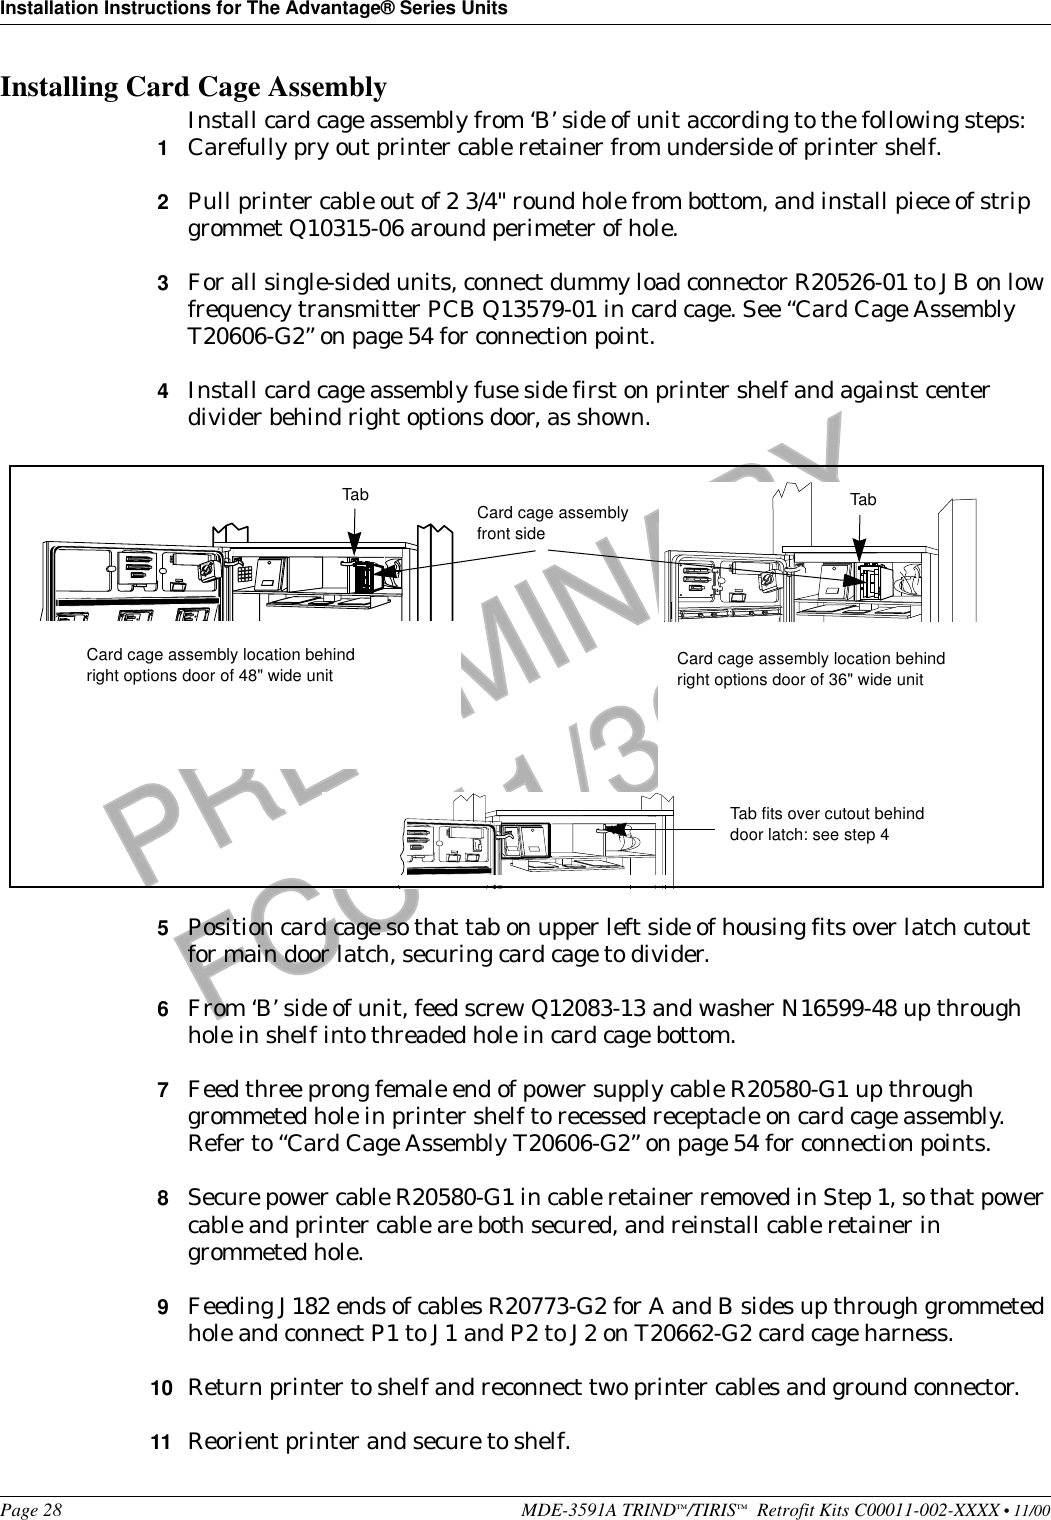 Installation Instructions for The Advantage® Series UnitsPage 28 MDE-3591A TRIND™/TIRIS™  Retrofit Kits C00011-002-XXXX • 11/00PRELIMINARYFCC 11/30Installing Card Cage AssemblyInstall card cage assembly from ‘B’ side of unit according to the following steps:1Carefully pry out printer cable retainer from underside of printer shelf.2Pull printer cable out of 2 3/4&quot; round hole from bottom, and install piece of strip grommet Q10315-06 around perimeter of hole.3For all single-sided units, connect dummy load connector R20526-01 to JB on low frequency transmitter PCB Q13579-01 in card cage. See “Card Cage Assembly T20606-G2” on page 54 for connection point.4Install card cage assembly fuse side first on printer shelf and against center divider behind right options door, as shown.5Position card cage so that tab on upper left side of housing fits over latch cutout for main door latch, securing card cage to divider.6From ‘B’ side of unit, feed screw Q12083-13 and washer N16599-48 up through hole in shelf into threaded hole in card cage bottom.7Feed three prong female end of power supply cable R20580-G1 up through grommeted hole in printer shelf to recessed receptacle on card cage assembly. Refer to “Card Cage Assembly T20606-G2” on page 54 for connection points.8Secure power cable R20580-G1 in cable retainer removed in Step 1, so that power cable and printer cable are both secured, and reinstall cable retainer in grommeted hole. 9Feeding J182 ends of cables R20773-G2 for A and B sides up through grommeted hole and connect P1 to J1 and P2 to J2 on T20662-G2 card cage harness. 10 Return printer to shelf and reconnect two printer cables and ground connector.11 Reorient printer and secure to shelf.Tab Card cage assemblyfront sideTab fits over cutout behind door latch: see step 4Card cage assembly location behind right options door of 36&quot; wide unitCard cage assembly location behind right options door of 48&quot; wide unitTab